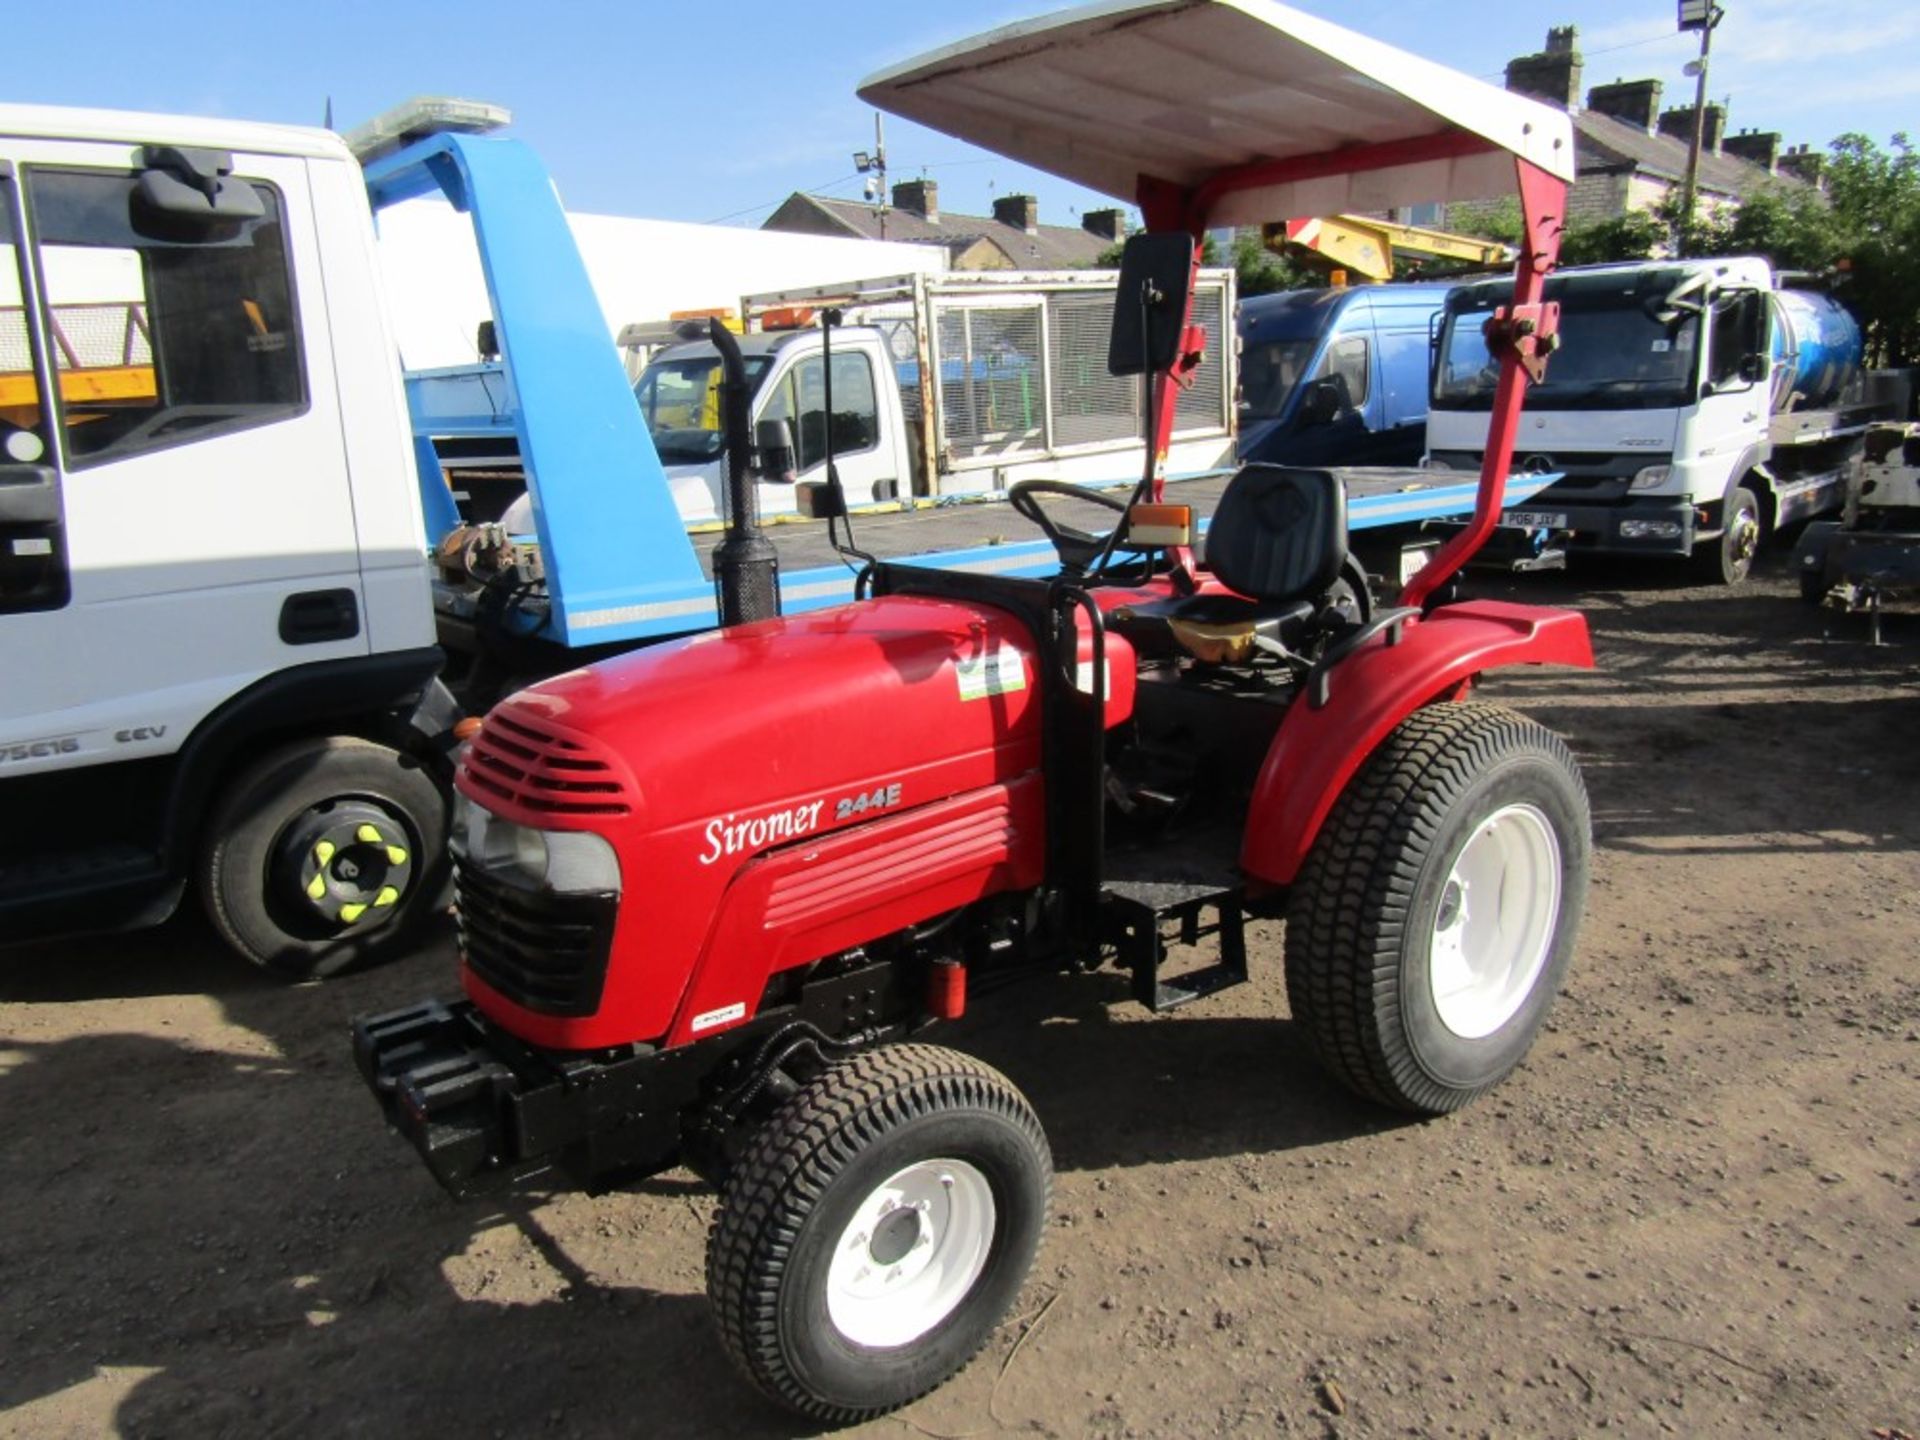 SIROMER 244E TRACTOR, 409 HOURS NOT WARRANTED [NO VAT] - Image 2 of 5